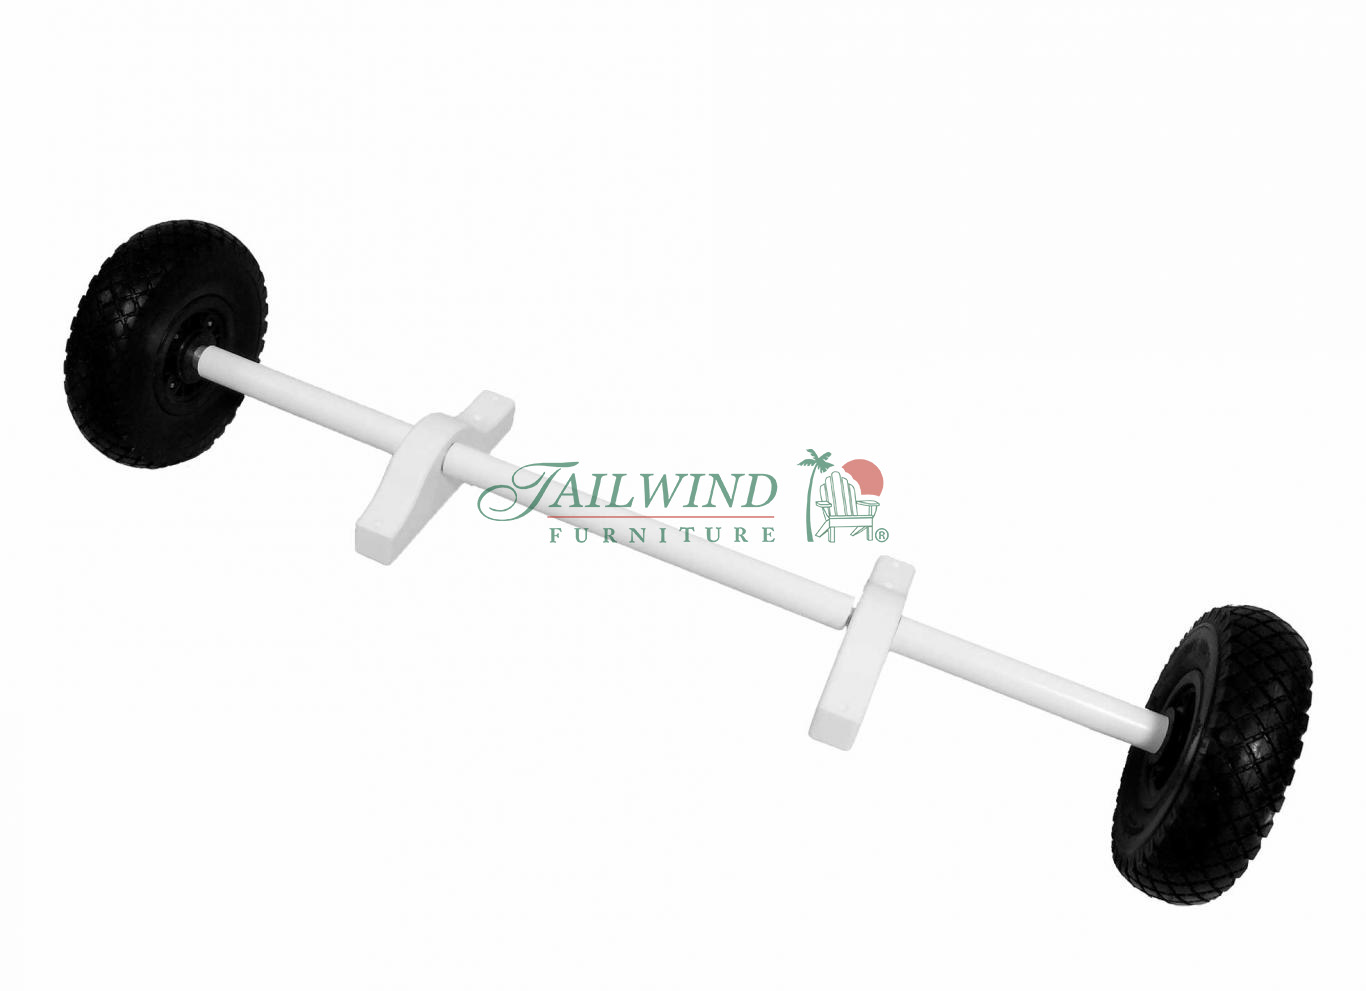 HSWH 565 Hard Surface Wheel Kit for all Tailwind Lifeguard Chairs  - Hard Surface Wheel Kit

<br><br><img alt="Tailwind Colors" src="/upload/image/tailwind-color-samples-gwsc.jpg" />